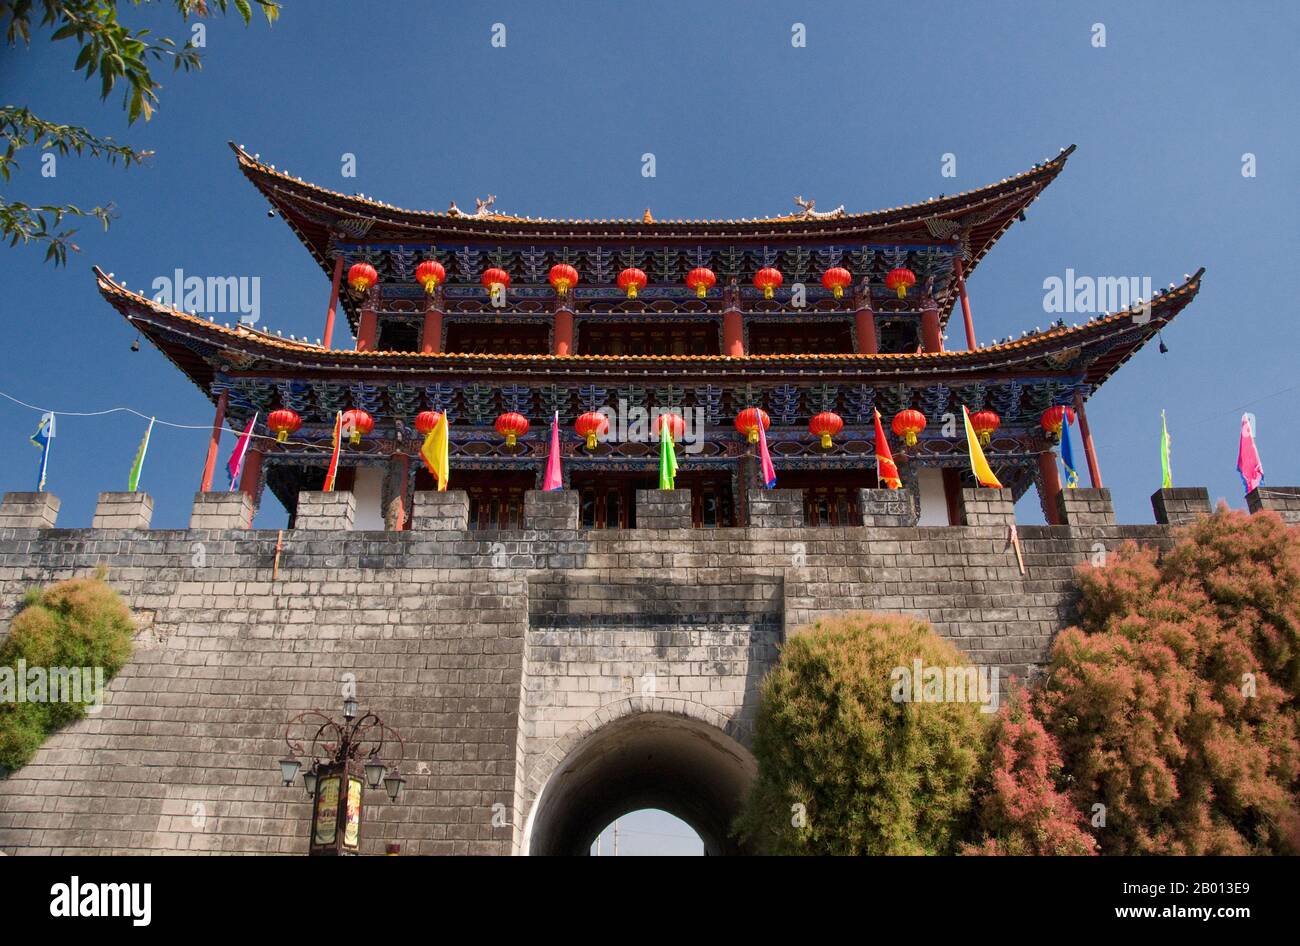 China: Anyuanmen (North Gate), Old Dali, Dali, Yunnan.  Dali is the ancient capital of both the Bai kingdom of Nanzhao, which flourished in the area during the 8th and 9th centuries, and the Kingdom of Dali, which reigned from 937-1253. Situated in a once significantly Muslim part of South China, Dali was also the center of the Panthay Rebellion against the reigning imperial Qing Dynasty from 1856-1863.  The old city was built during Ming Dynasty emperor Hongwu's reign (1368–1398). Stock Photo